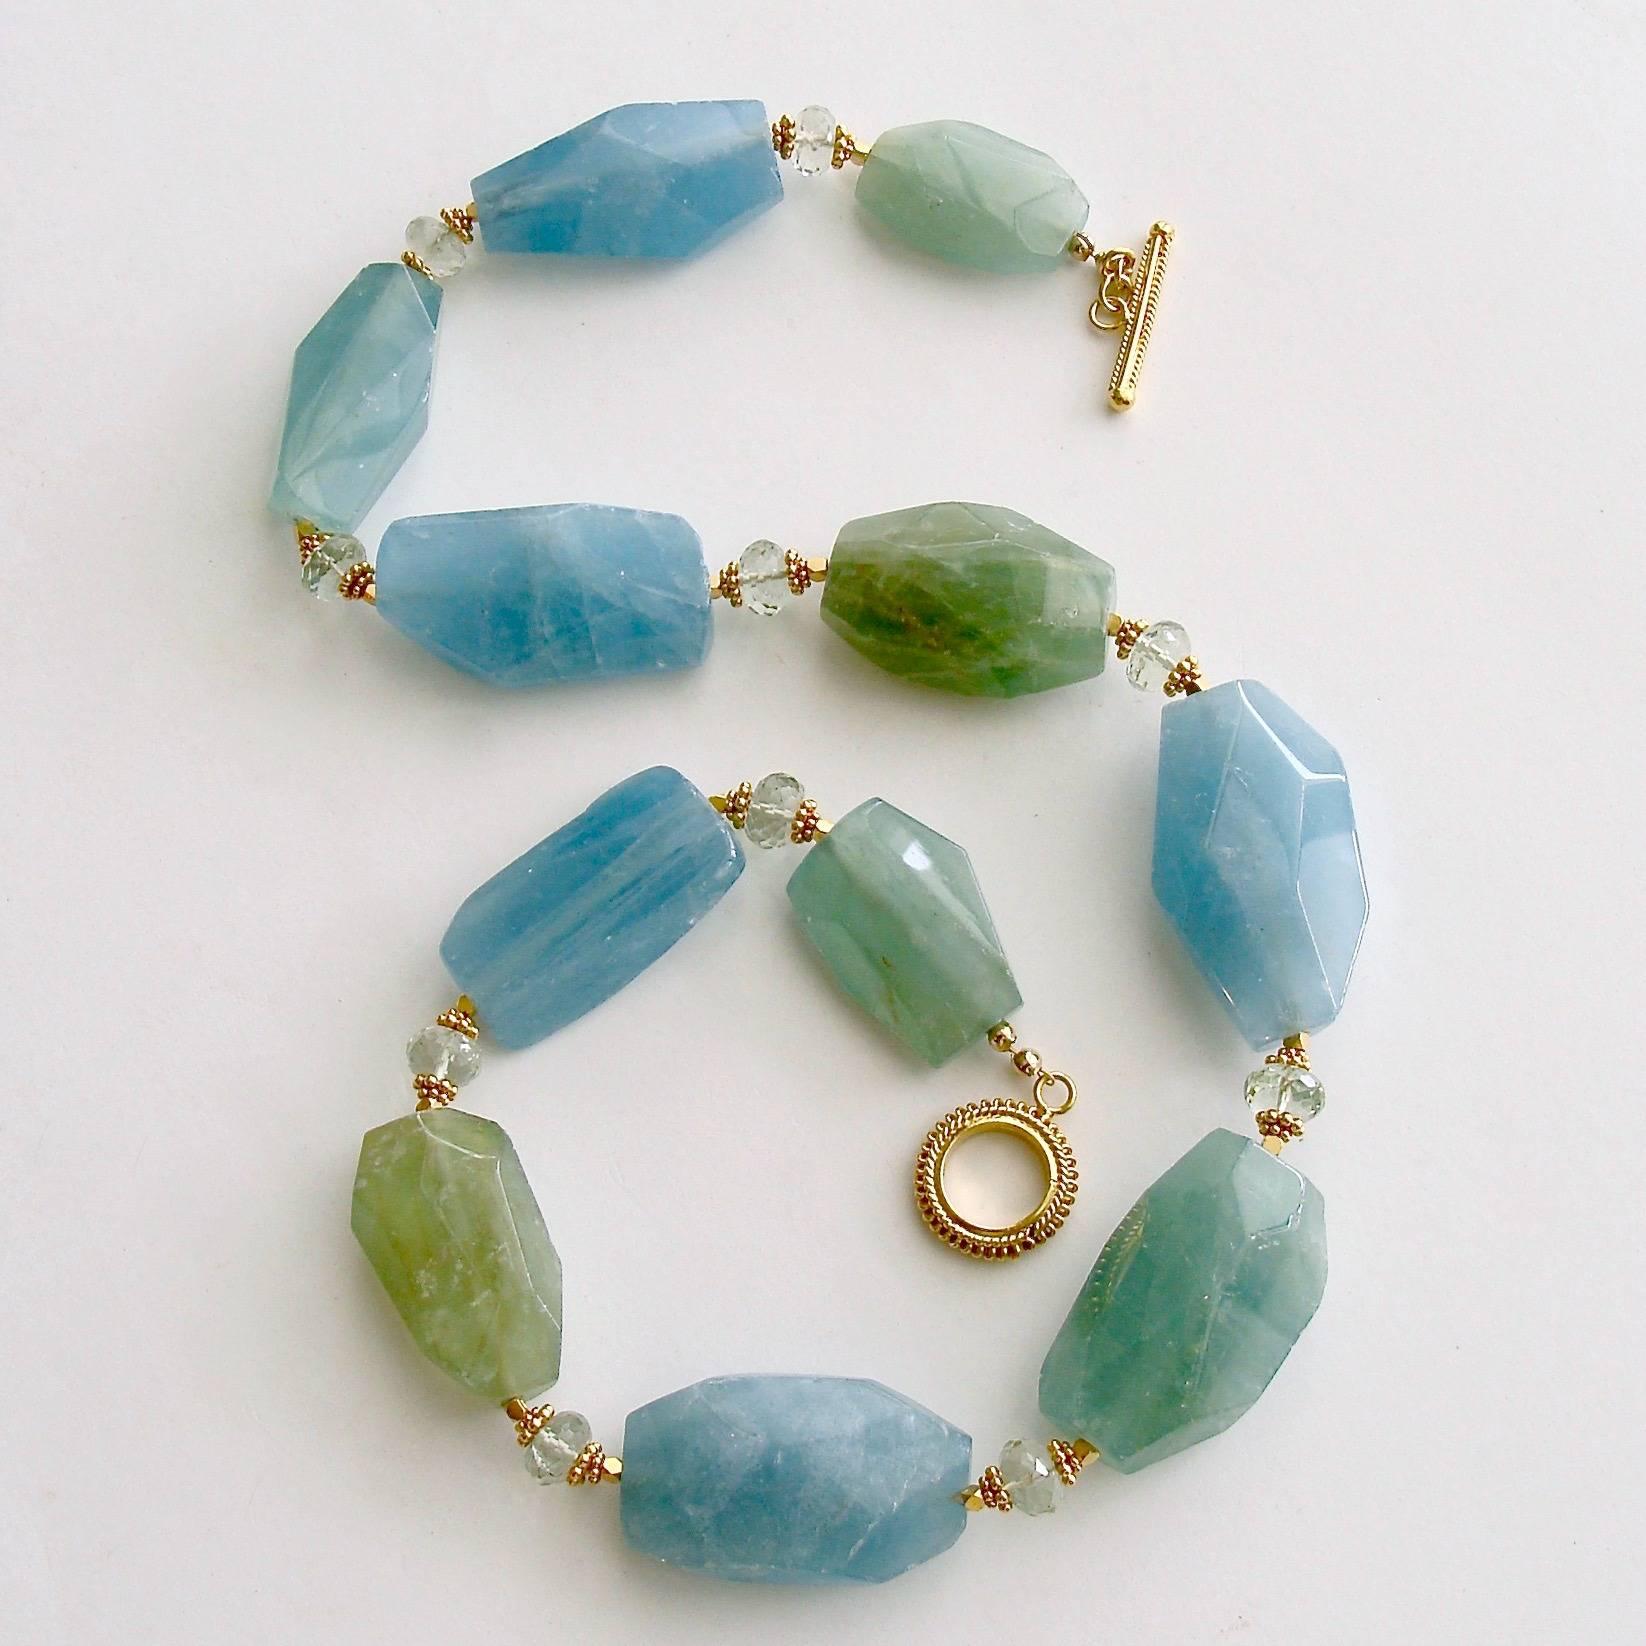 Brynn III Necklace.

Luxe, natural and organic faceted aquamarine nuggets, ranging in colors from watery aqua blue to fresh spring greens, comprise this mesmerizing necklace.  Each of the generous nuggets is separated with a delicate micro faceted